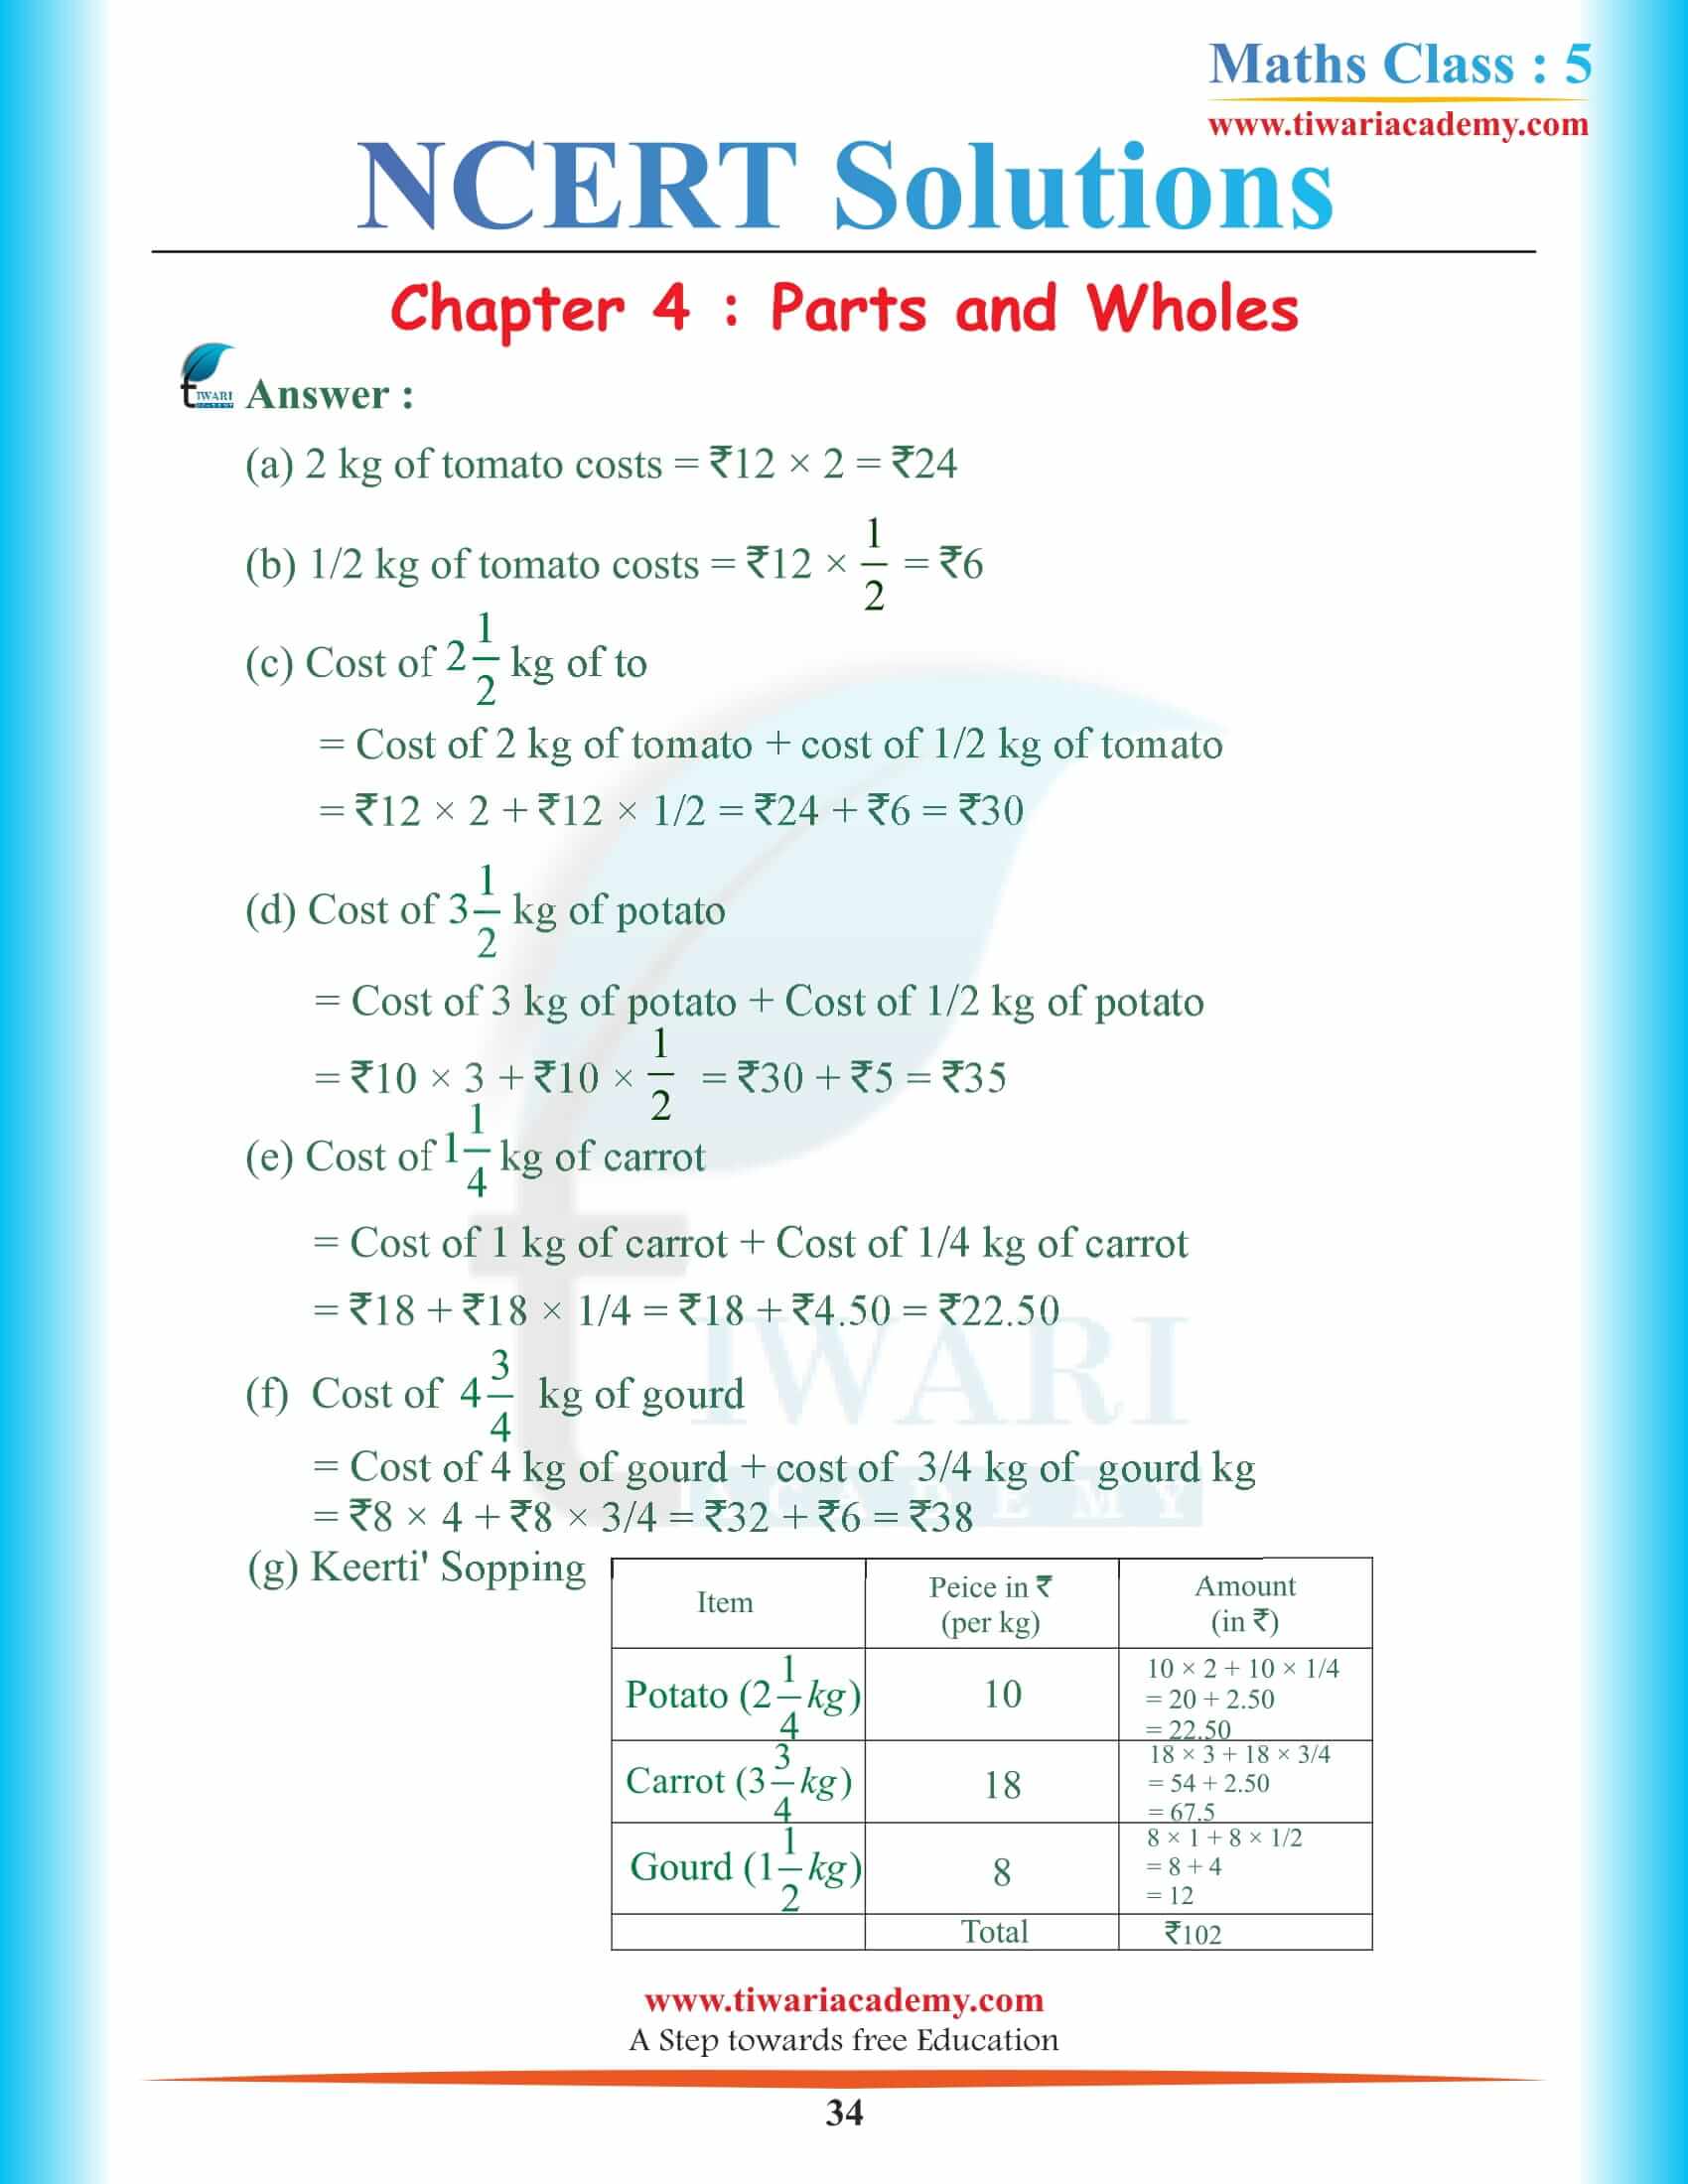 Grade 5 Maths Chapter 4 Solutions pdf download